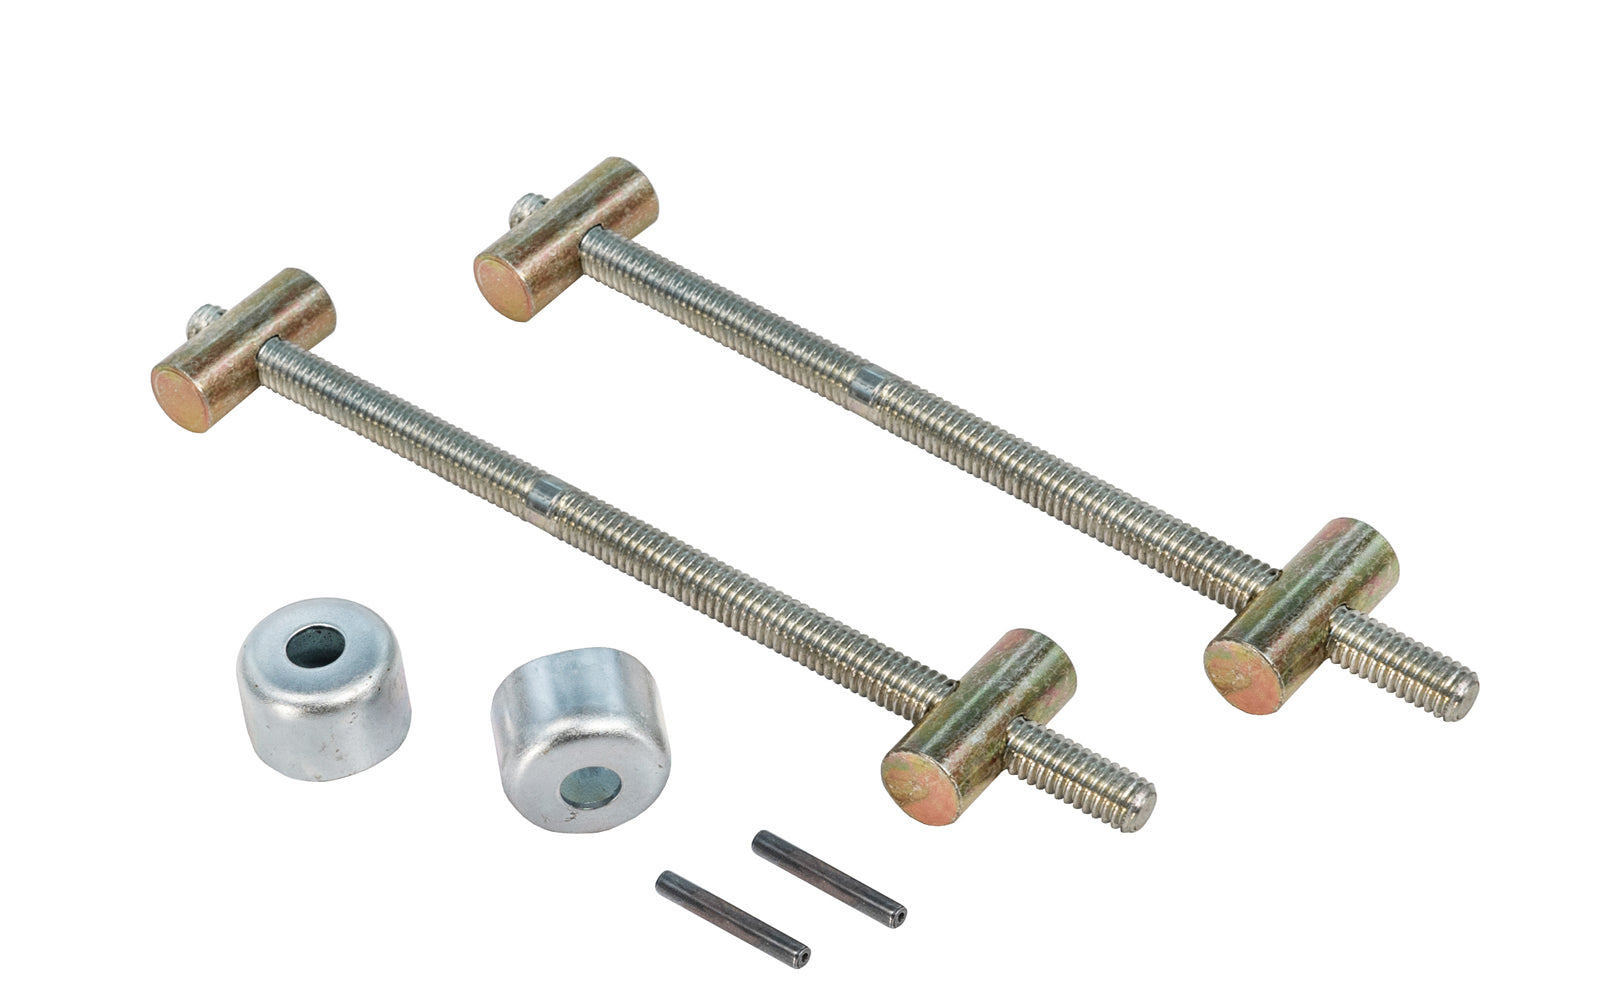 Build your own adjustable handscrew clamp with this kit. This kit is designed for 14